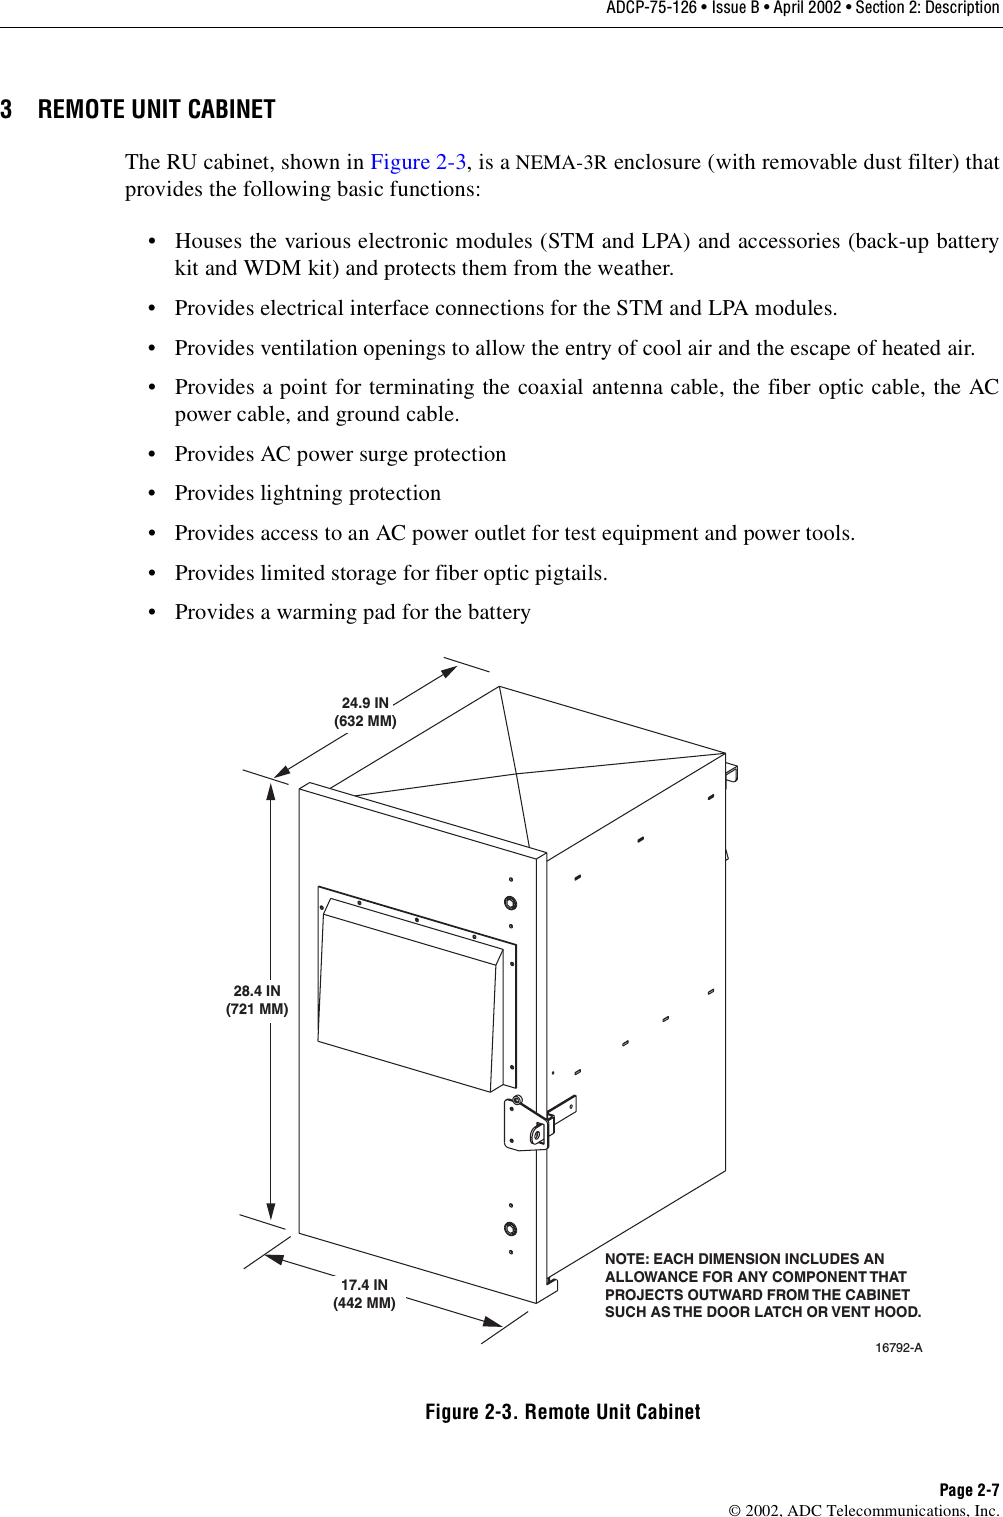 ADCP-75-126 • Issue B • April 2002 • Section 2: DescriptionPage 2-7©2002, ADC Telecommunications, Inc.3 REMOTE UNIT CABINETThe RU cabinet, shown in Figure 2-3,is aNEMA-3R enclosure (with removable dust filter) thatprovides the following basic functions:• Houses the various electronic modules (STM and LPA) and accessories (back-up batterykit and WDM kit) and protects them from the weather.• Provides electrical interface connections for the STM and LPA modules.• Provides ventilation openings to allow the entry of cool air and the escape of heated air.• Provides apoint for terminating the coaxial antenna cable, the fiber optic cable, the ACpower cable, and ground cable.• Provides AC power surge protection• Provides lightning protection• Provides access to an AC power outlet for test equipment and power tools.• Provides limited storage for fiber optic pigtails.• Provides awarming pad for the batteryFigure 2-3. Remote Unit Cabinet16792-A24.9 IN(632 MM)28.4 IN(721 MM)17.4 IN(442 MM)NOTE: EACH DIMENSION INCLUDES ANALLOWANCE FOR ANY COMPONENT THATPROJECTS OUTWARD FROM THE CABINETSUCH AS THE DOOR LATCH OR VENT HOOD.